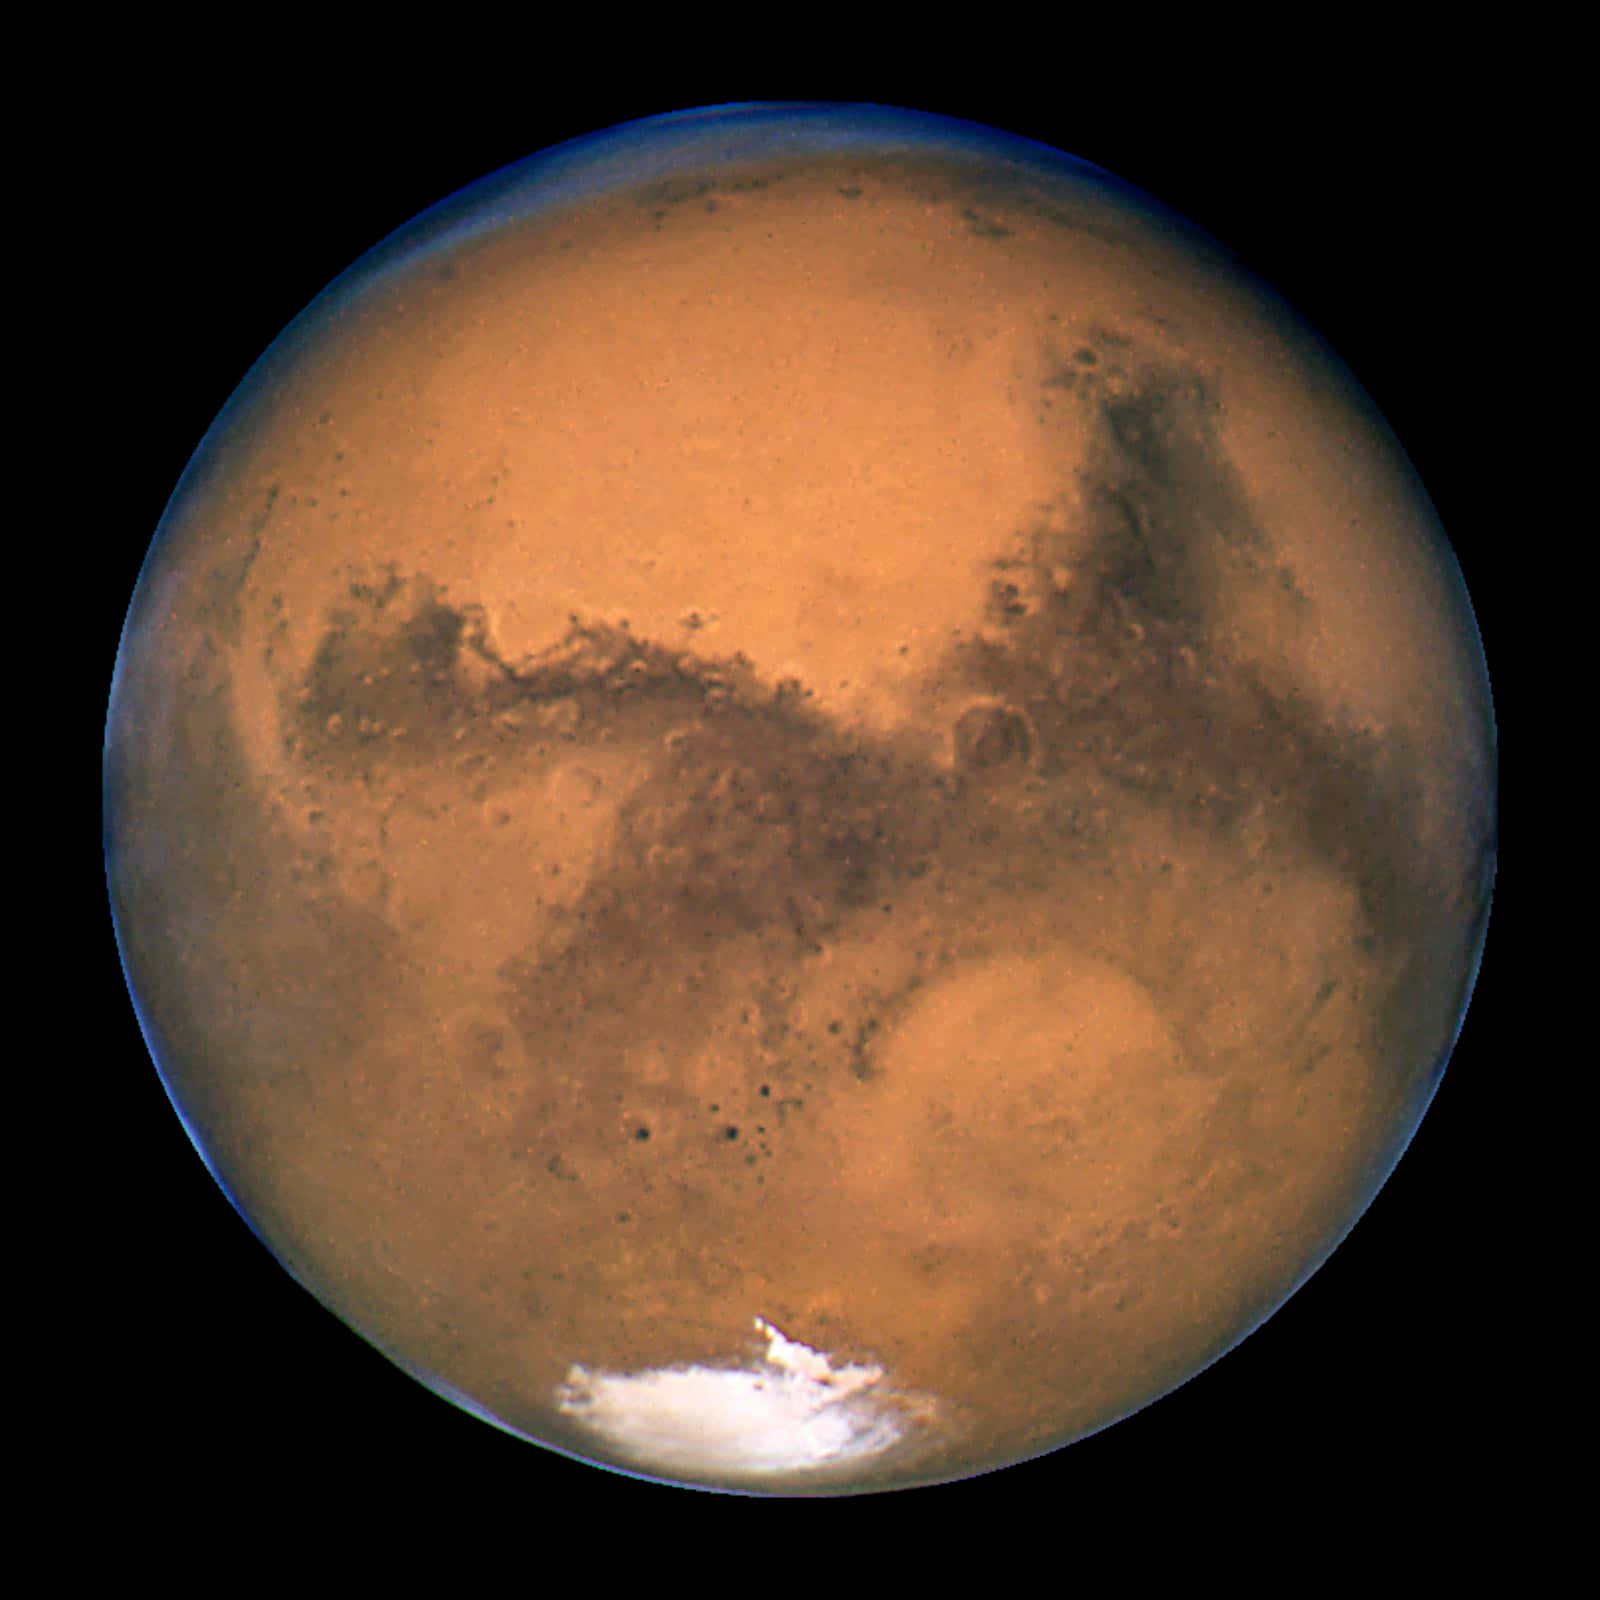 The Red Planet, also known as Mars, shown in all its glory